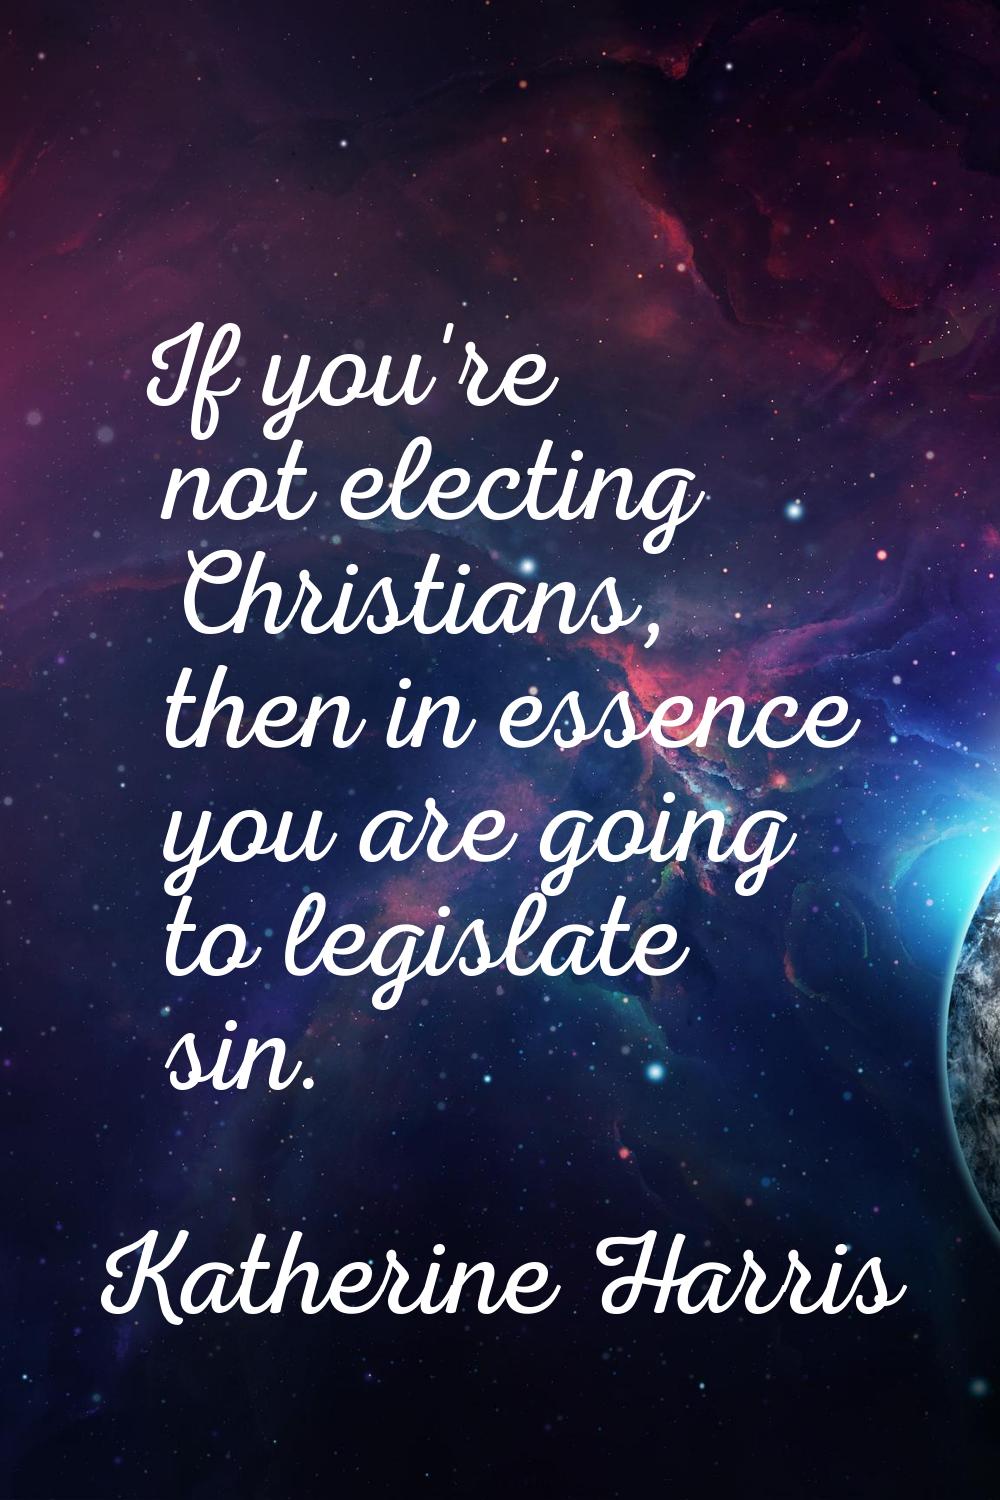 If you're not electing Christians, then in essence you are going to legislate sin.